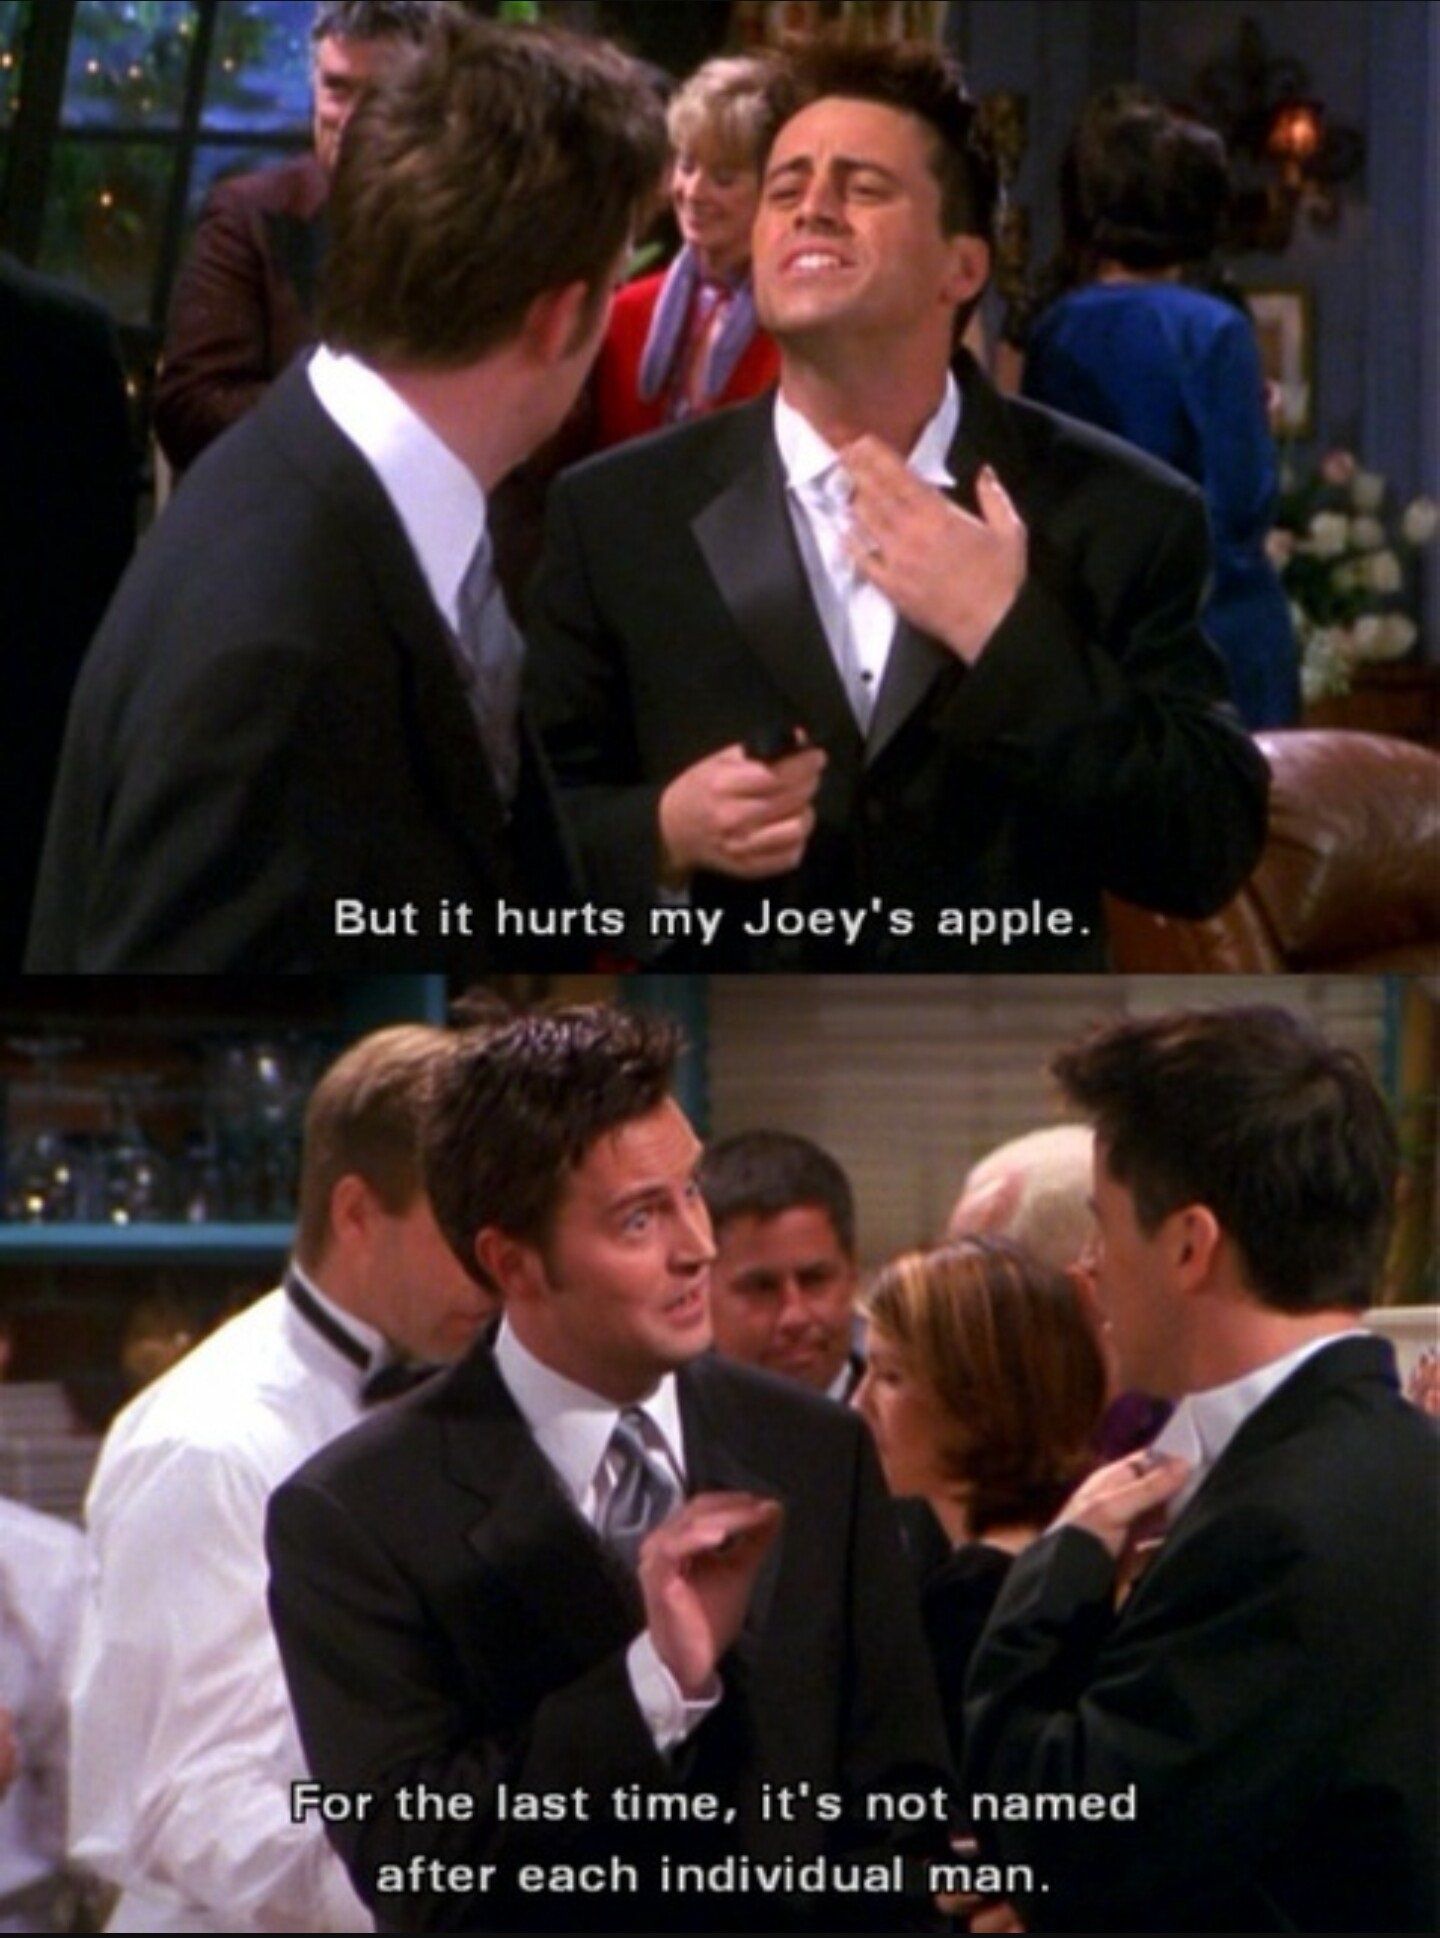 Chandler's Apple seems to be fine though